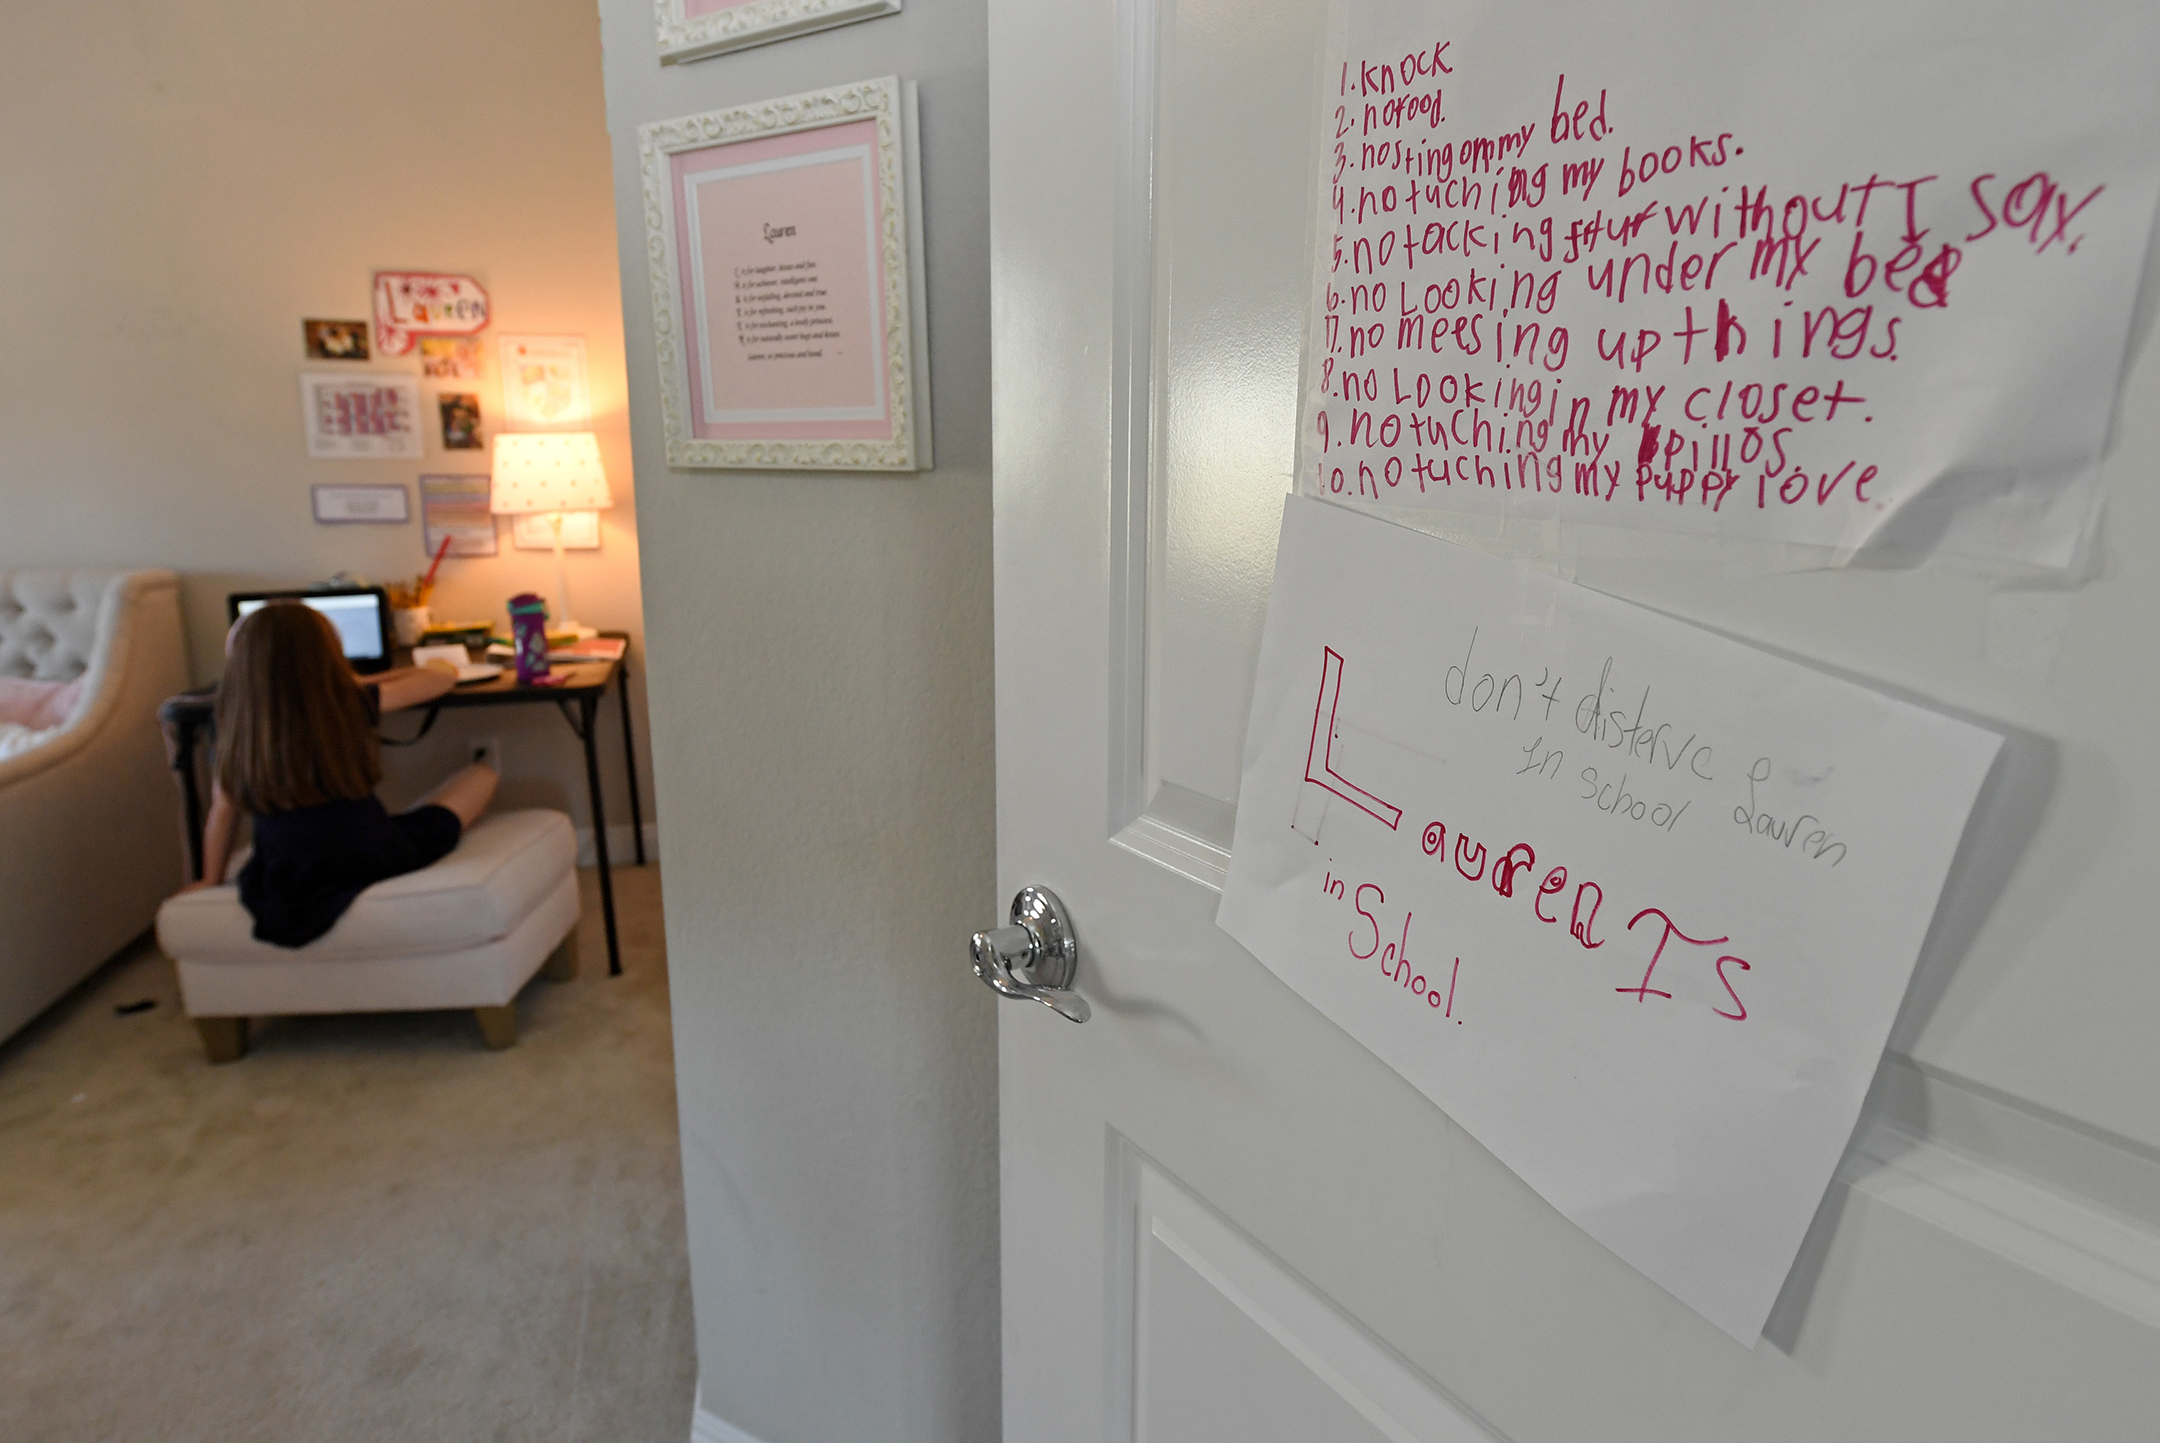 Photo of a bedroom door, open, with a young girl in the background working on a computer at a desk